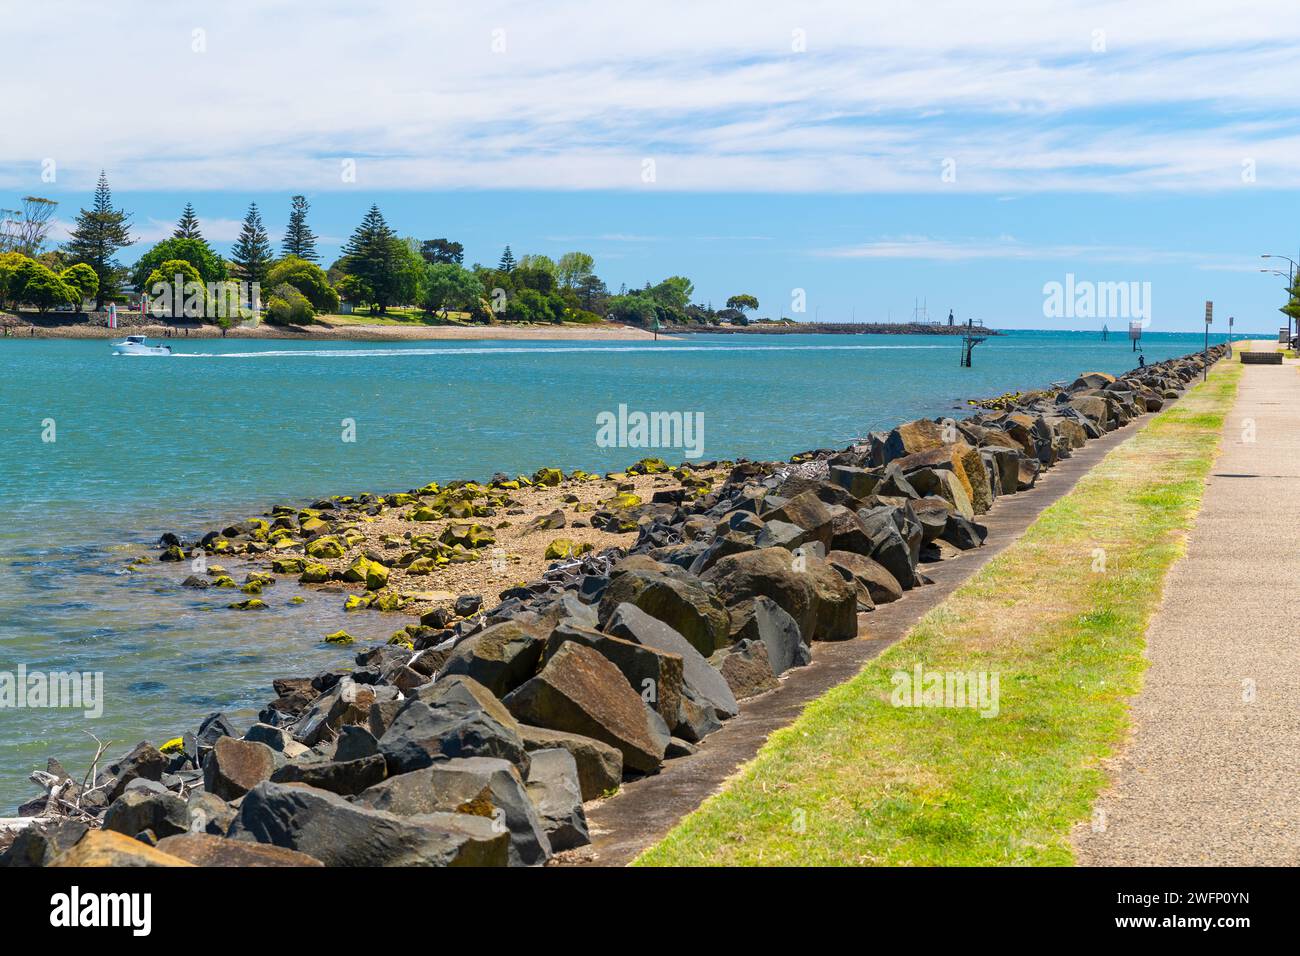 The Mersey River and Devonport in Tasmania, Australia, seen from the Heritage Walking Track in East Devonport. Stock Photo